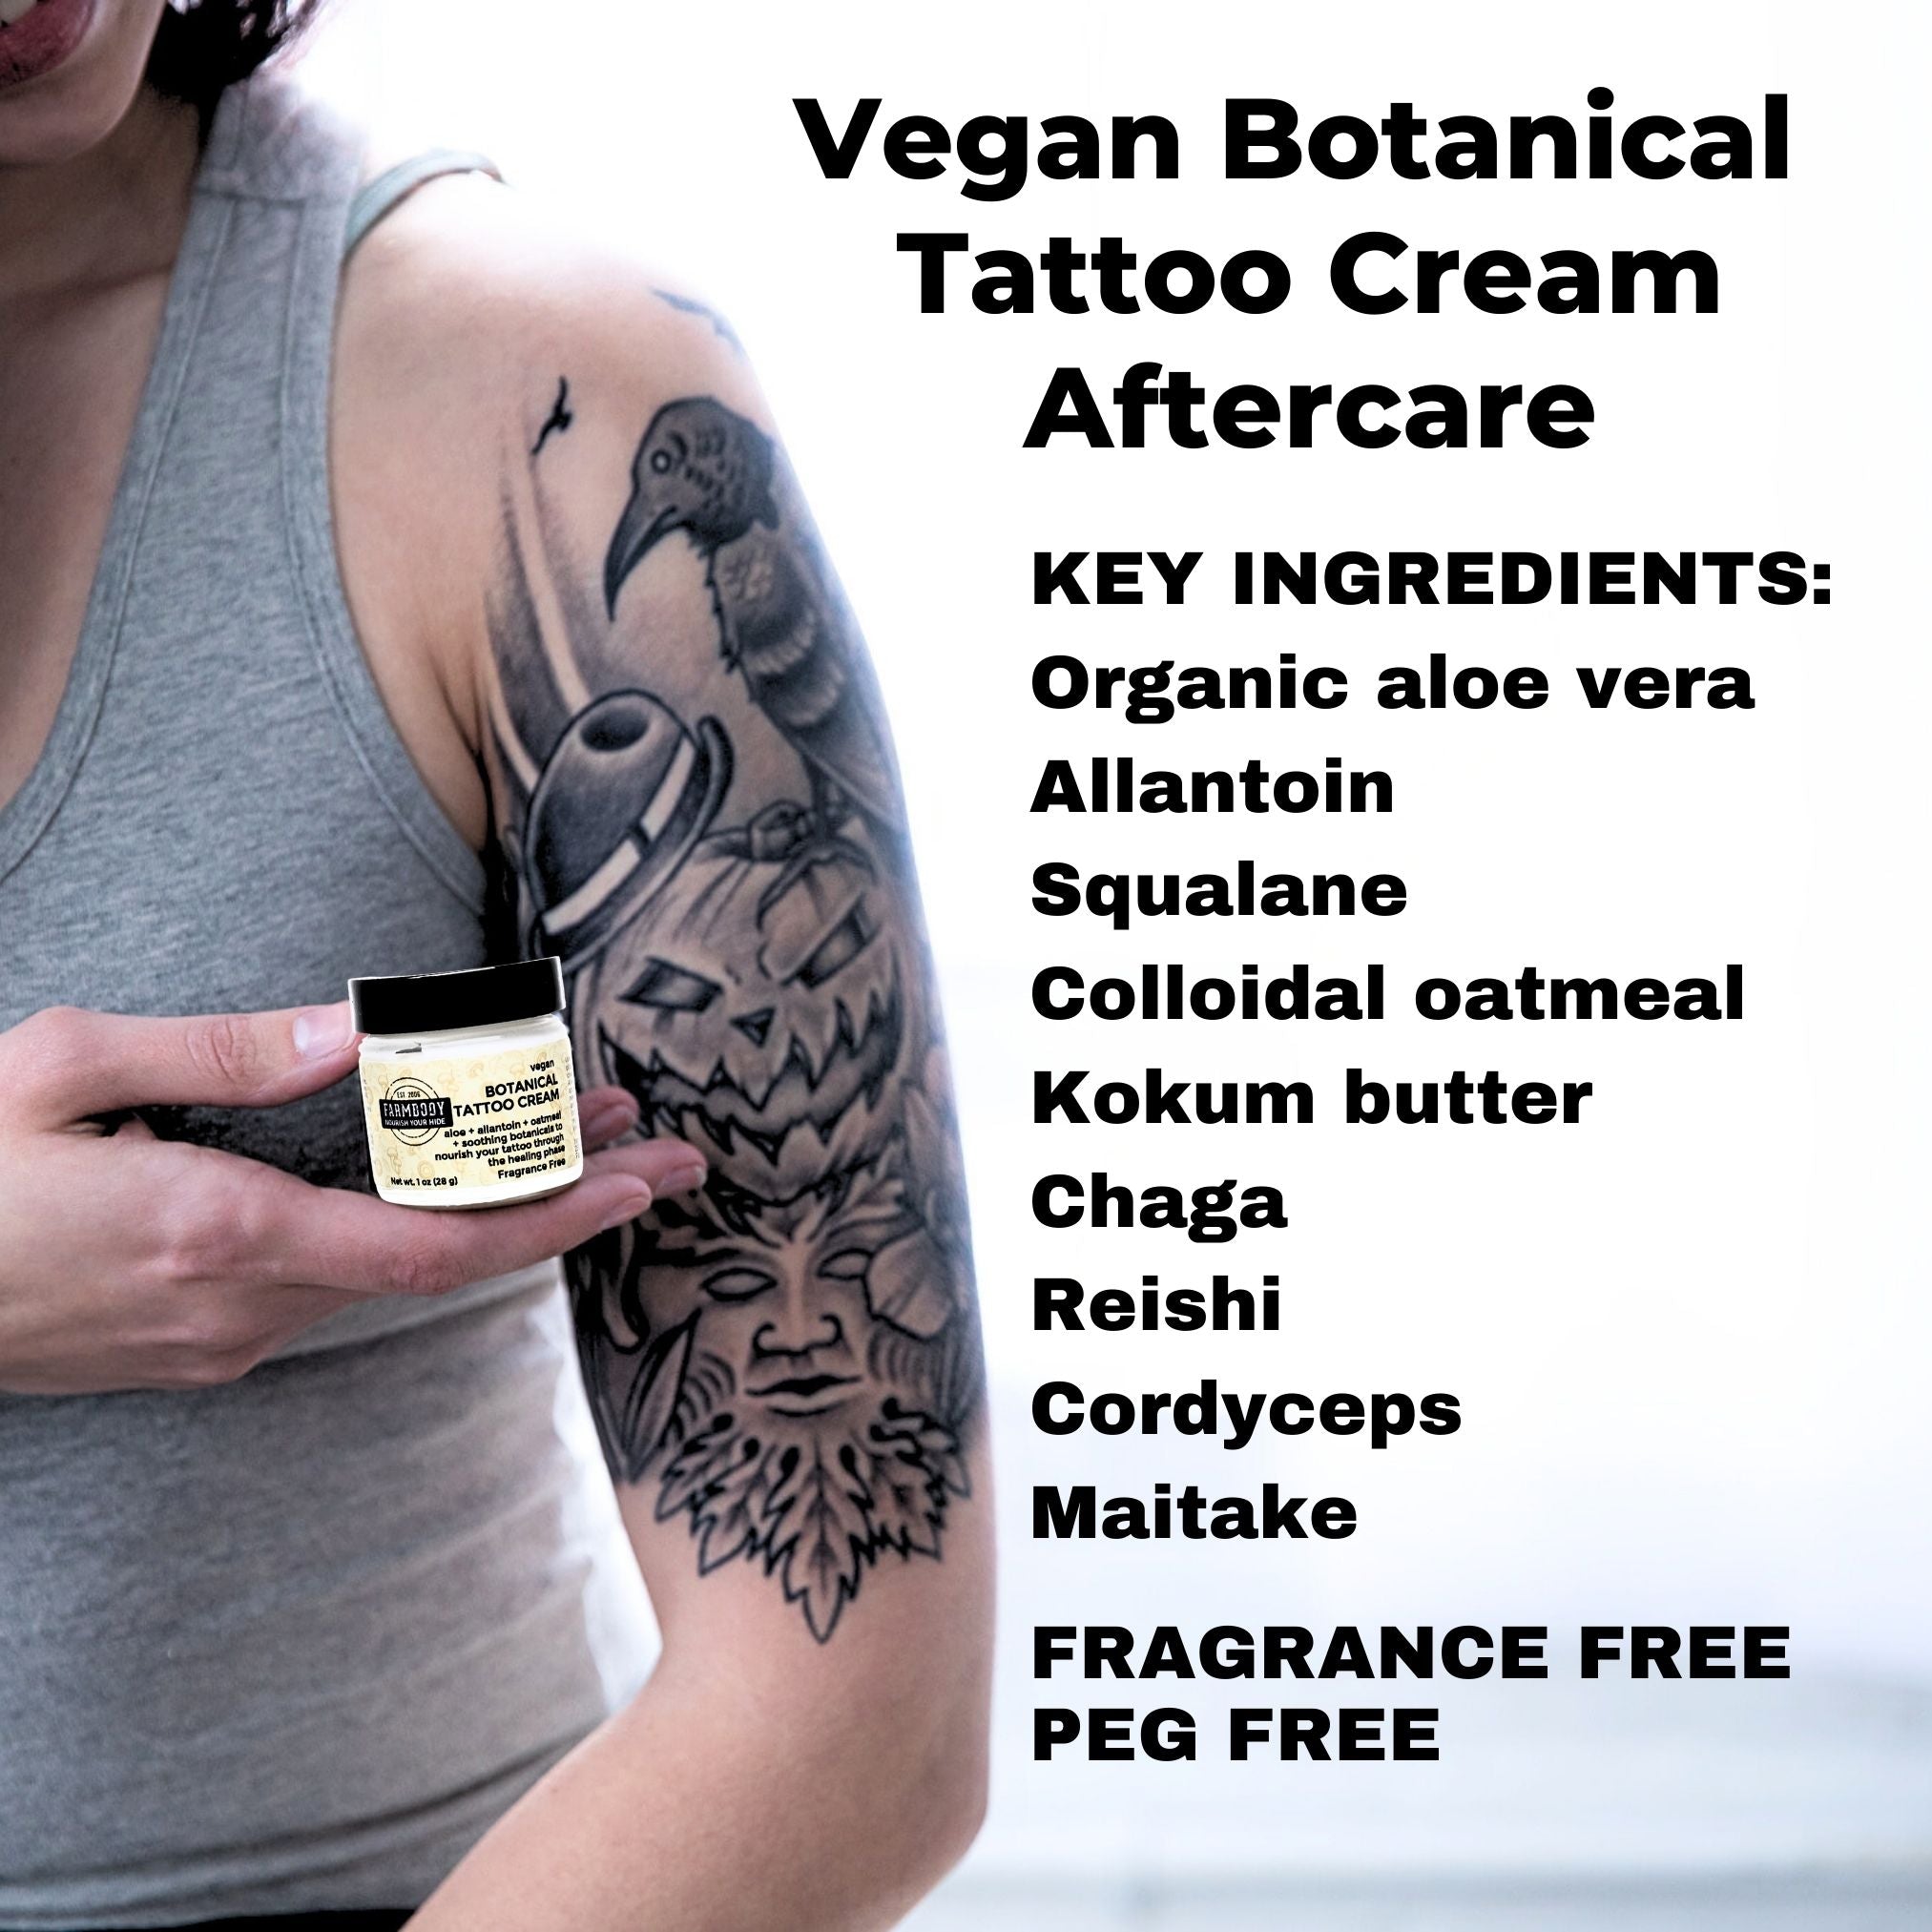 Vegan botanical cream aftercare key ingredients for taking care of a new tattoo